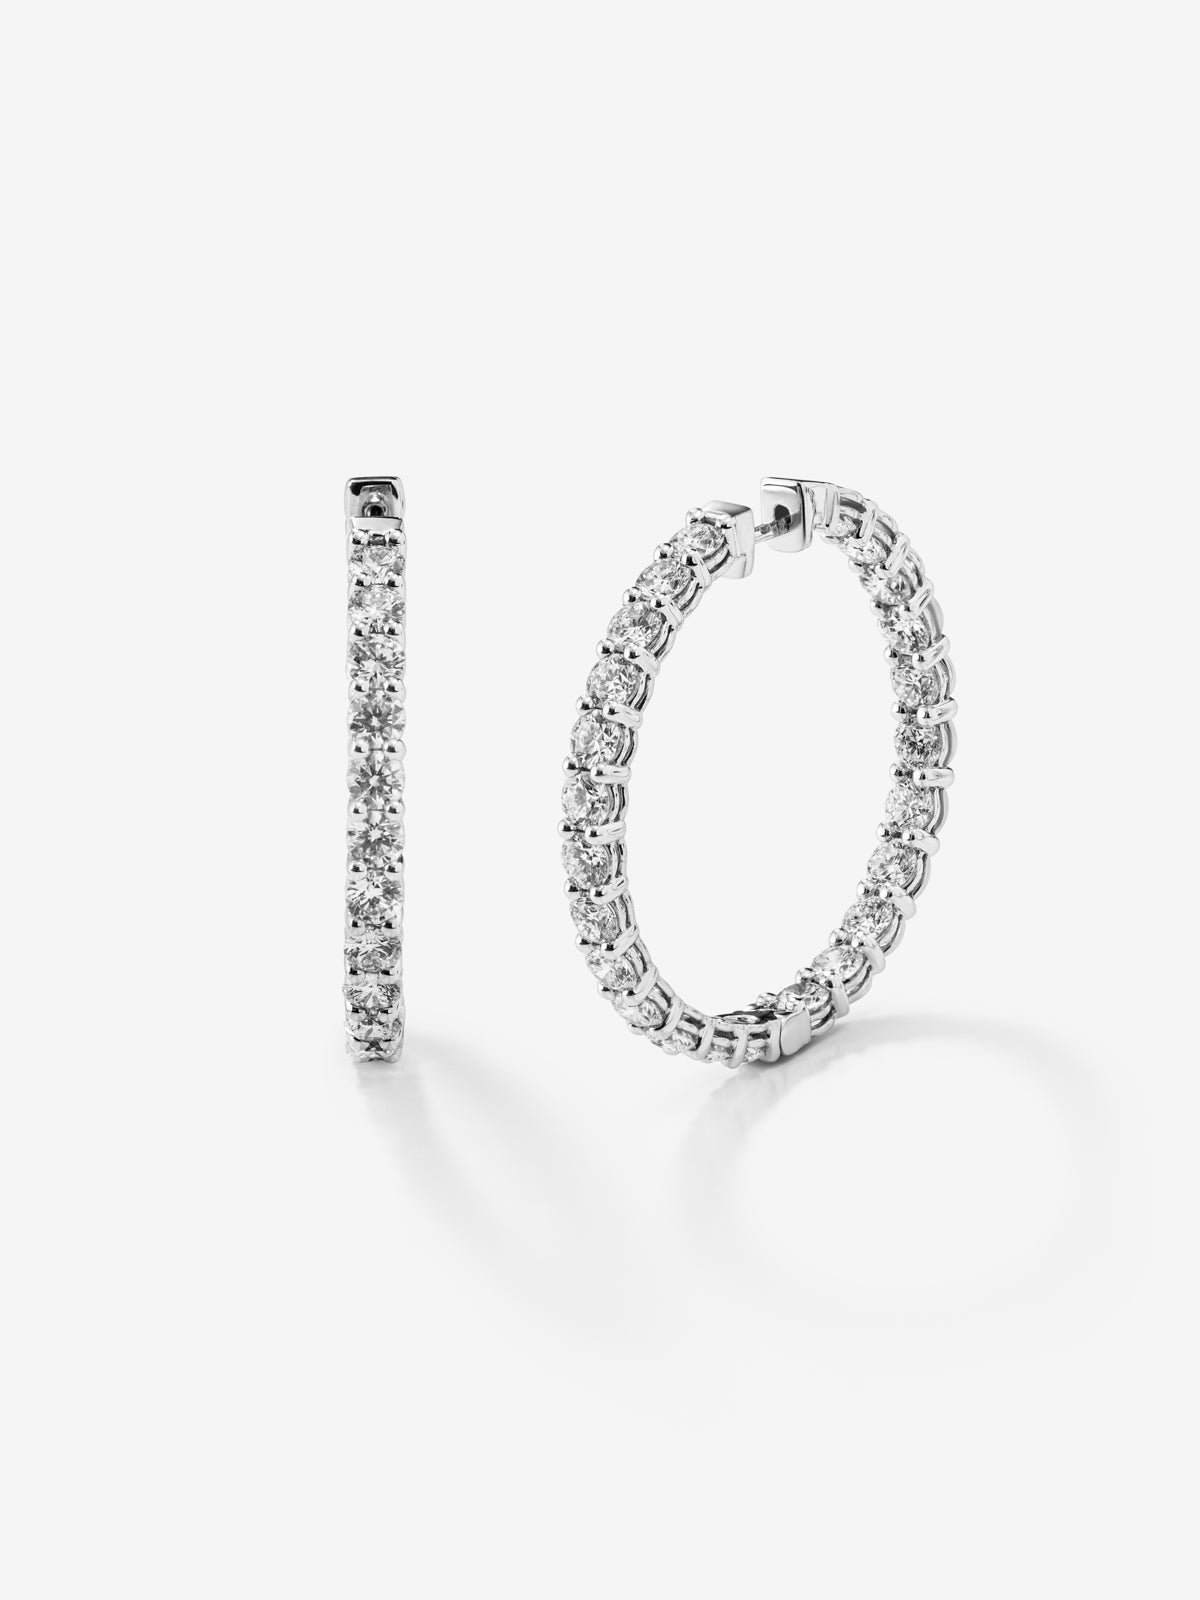 18K white gold hoop earrings with 52 brilliant-cut diamonds with a total of 7.2 cts